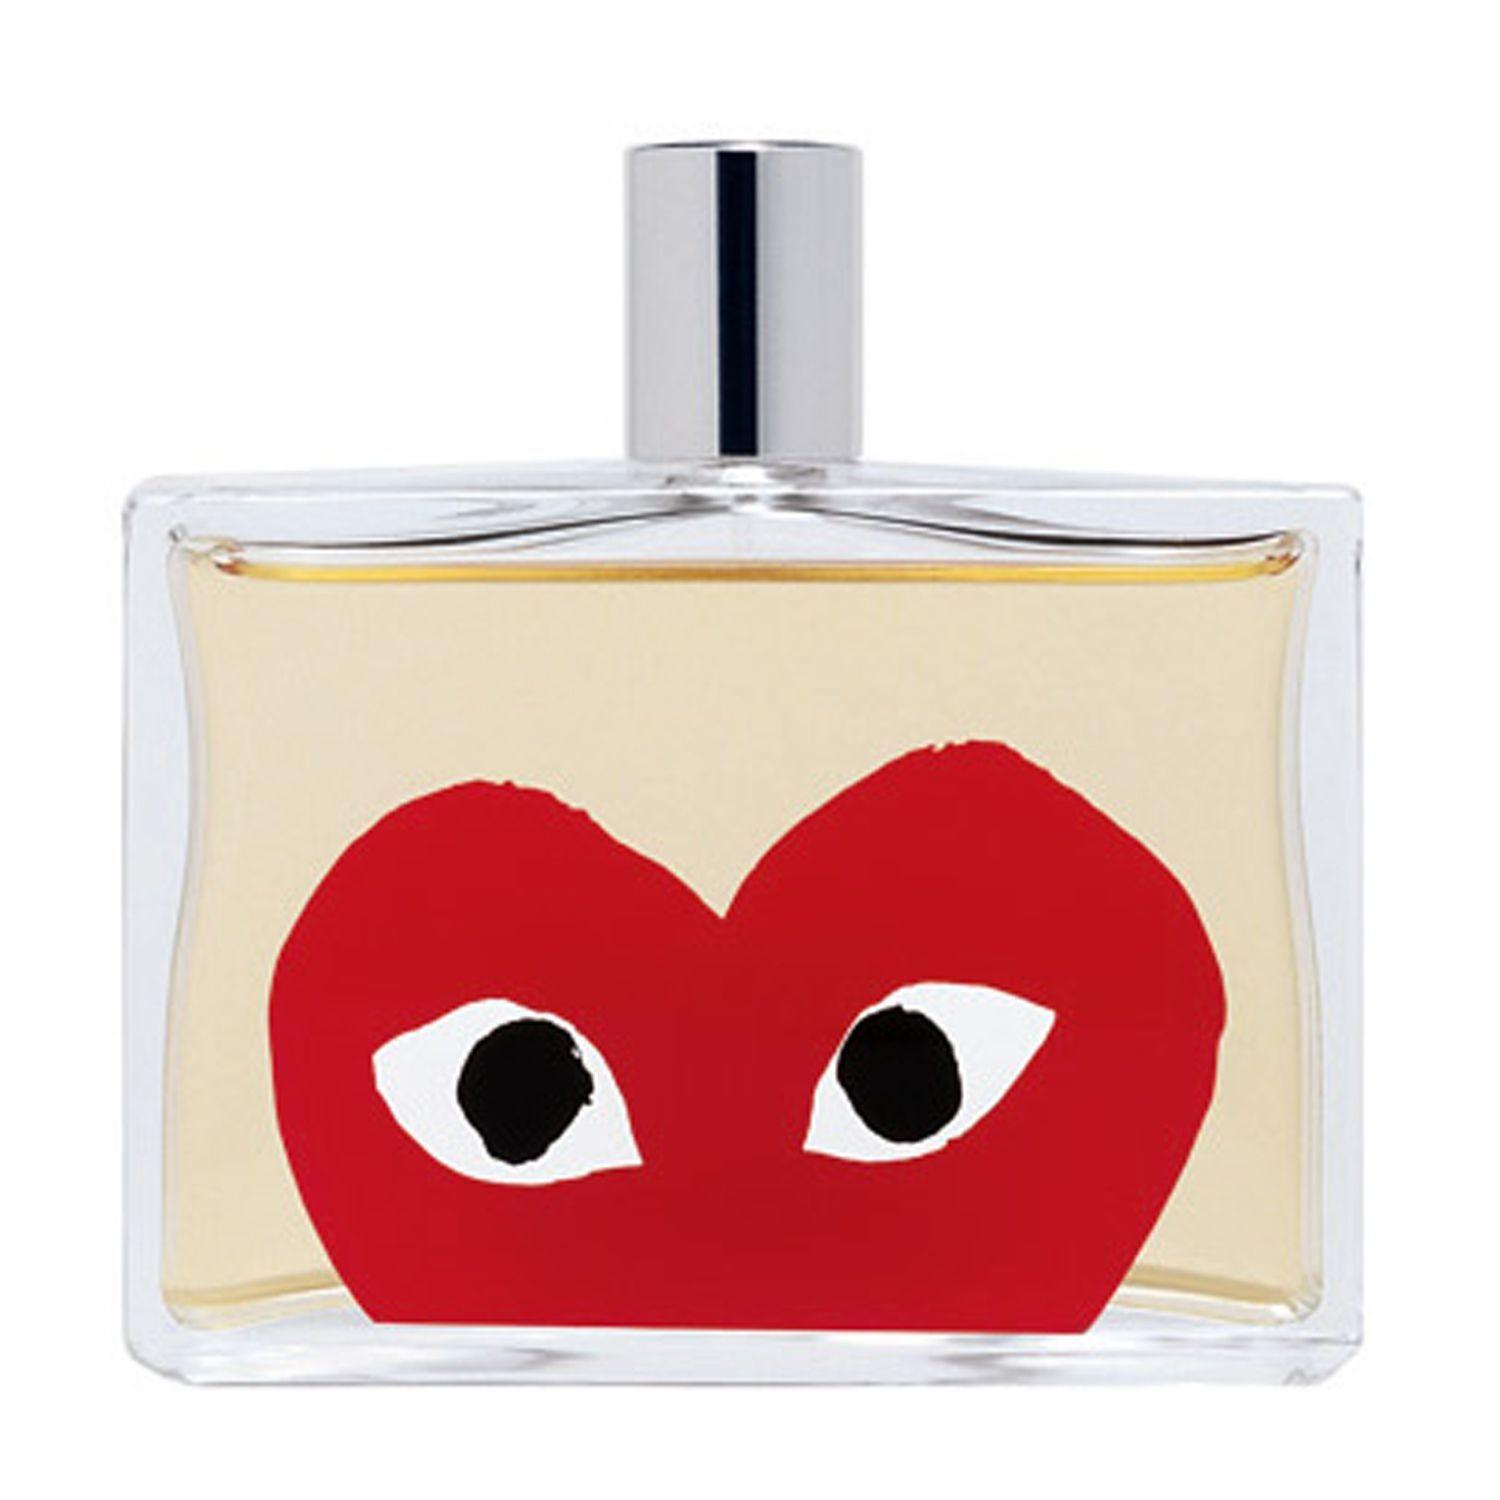 comme des garcons play red woda toaletowa 1 ml   